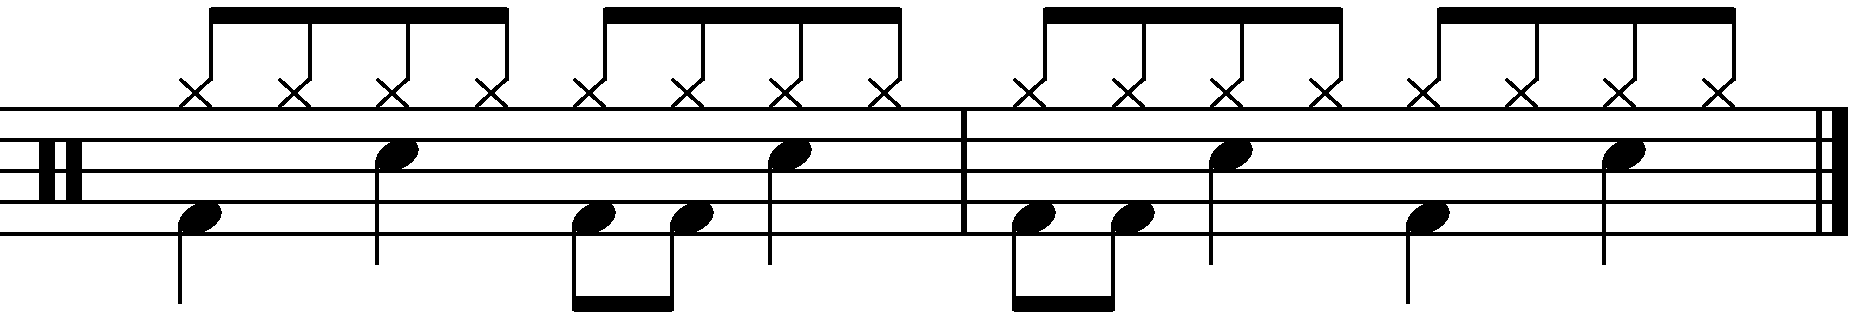 2 Bar Grooves - Example 2b